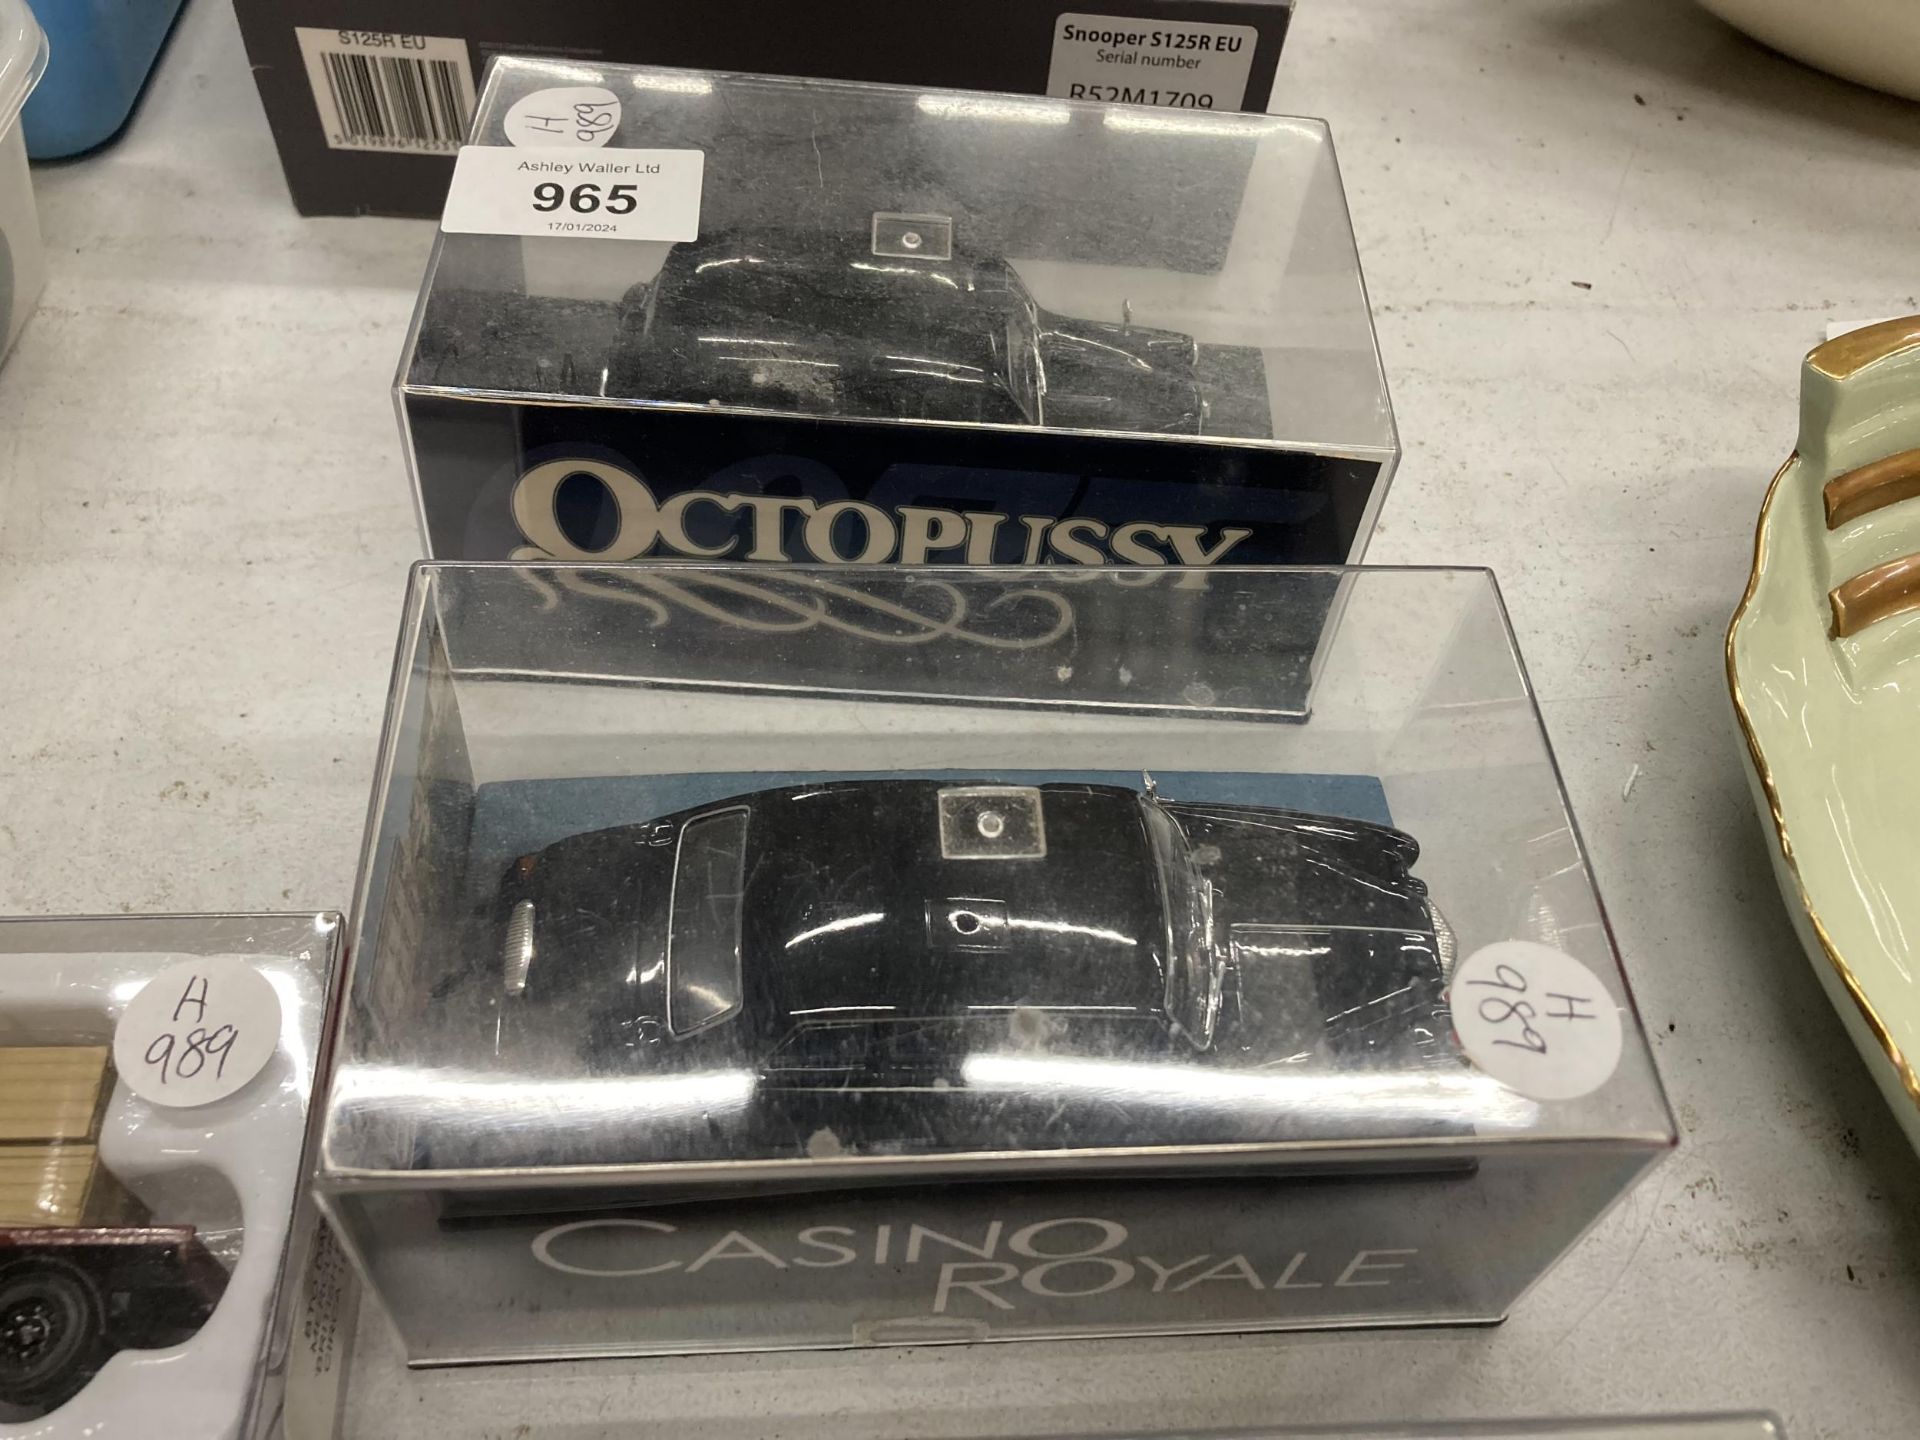 FIVE BOXED CARS TO INCLUDE CASINO ROYALE, OCTOPUSSY, ROLLS ROYCE ETC - Bild 2 aus 4